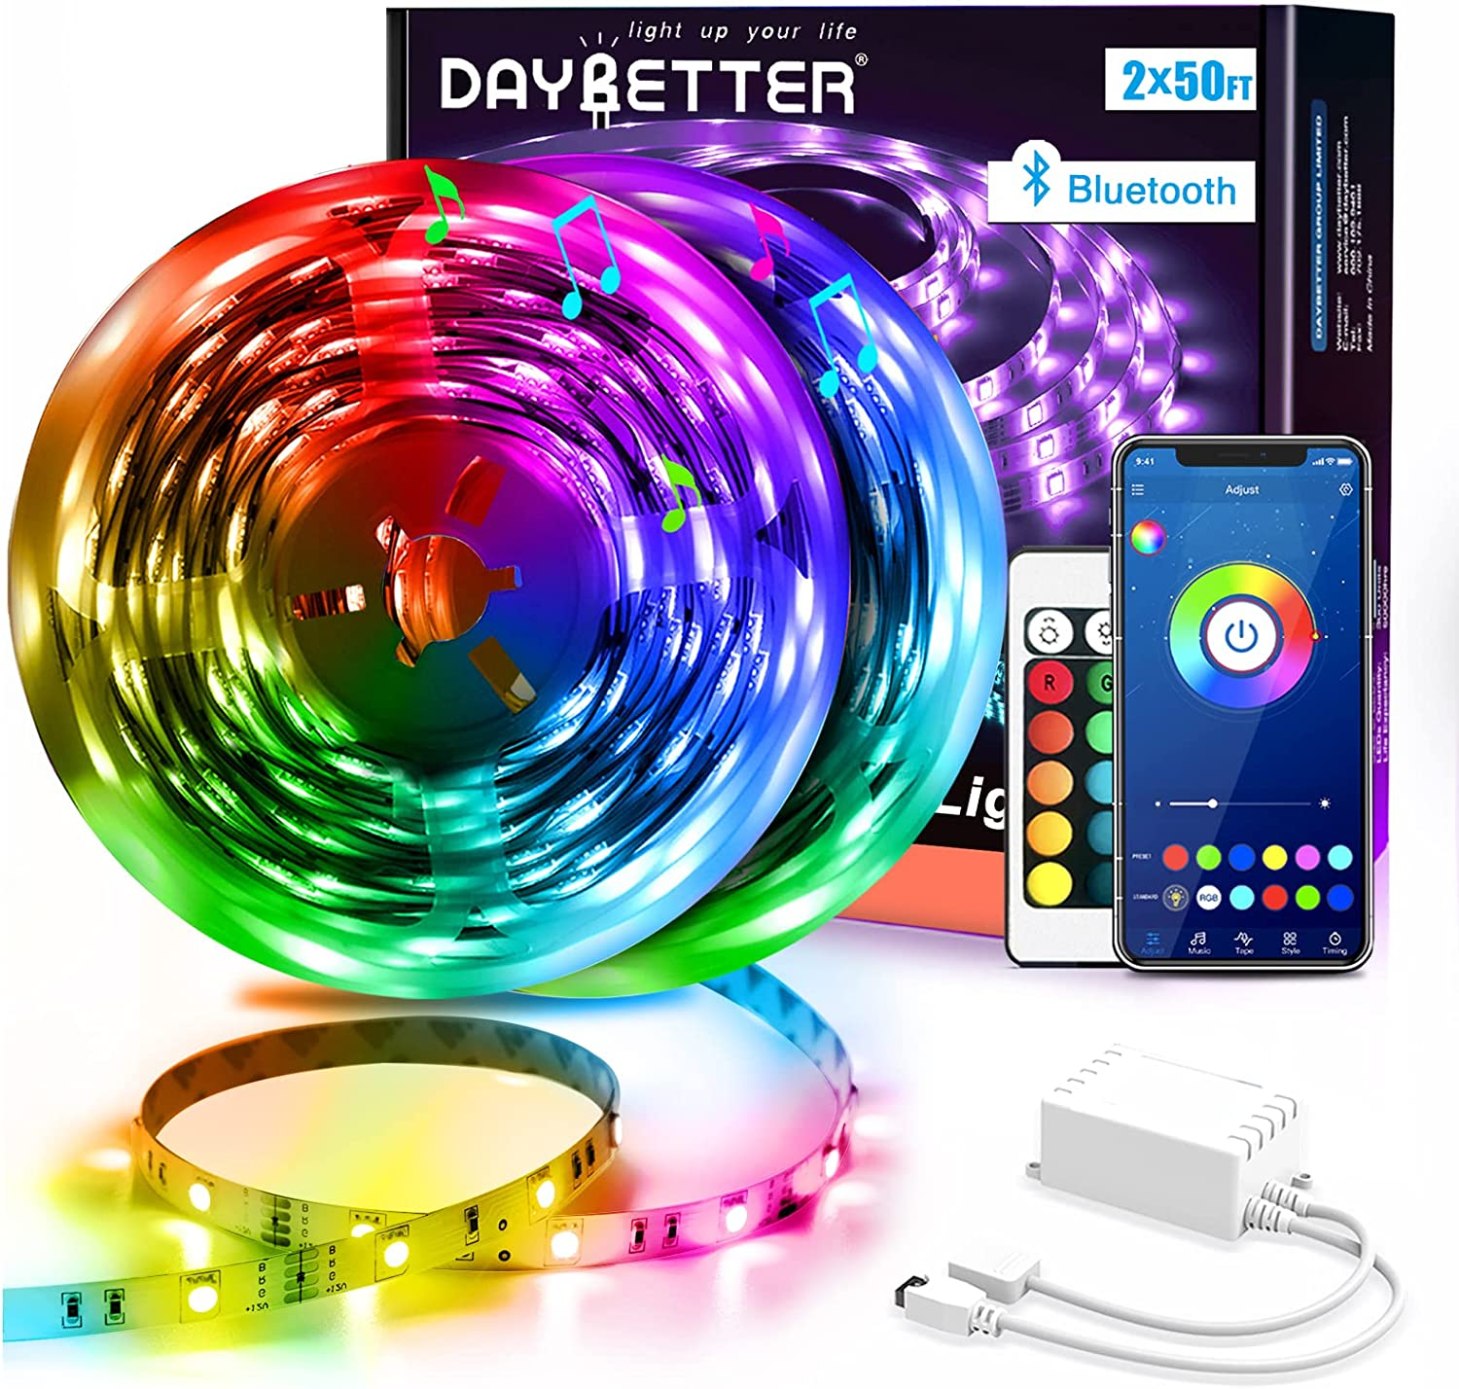 daybetter strip lights, one of the best gifts for teen boys